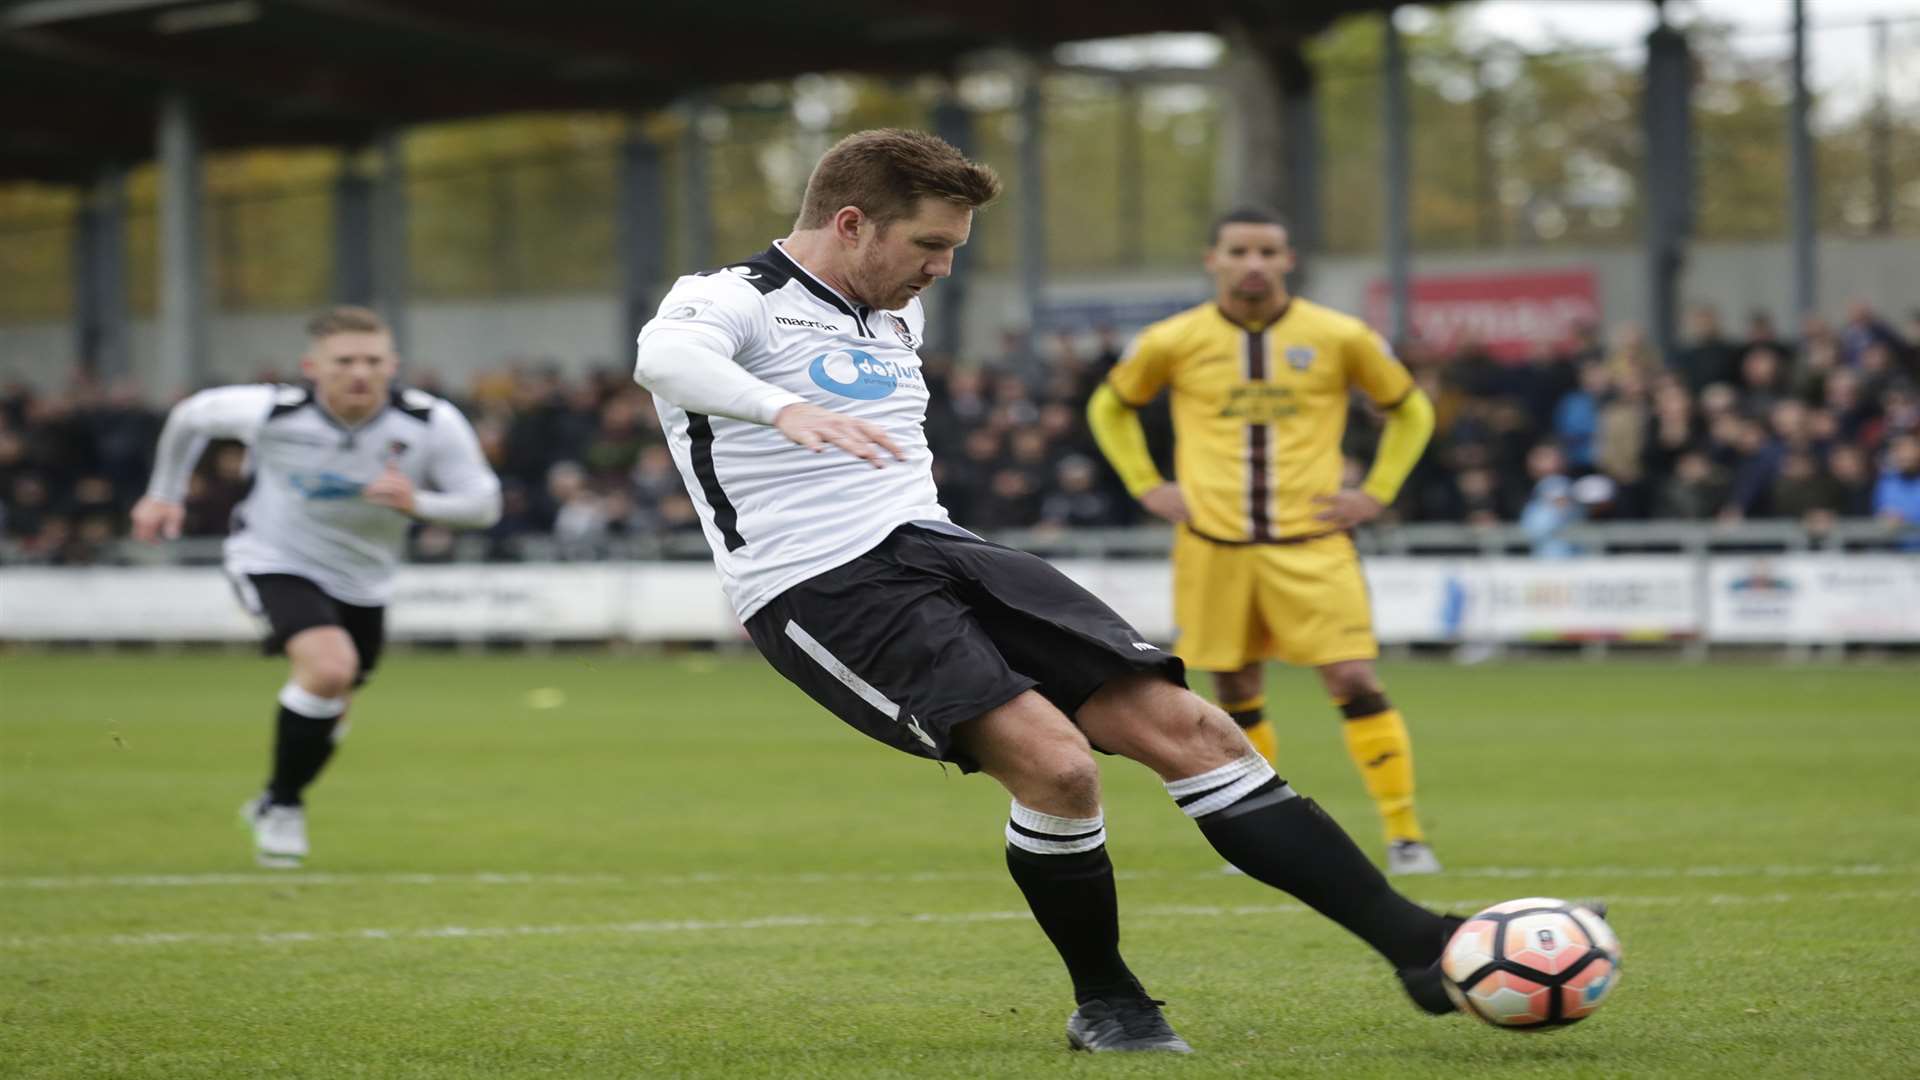 Elliot Bradbrook scores one of his 24 goals for Dartford in 2016-17 Picture: Martin Apps